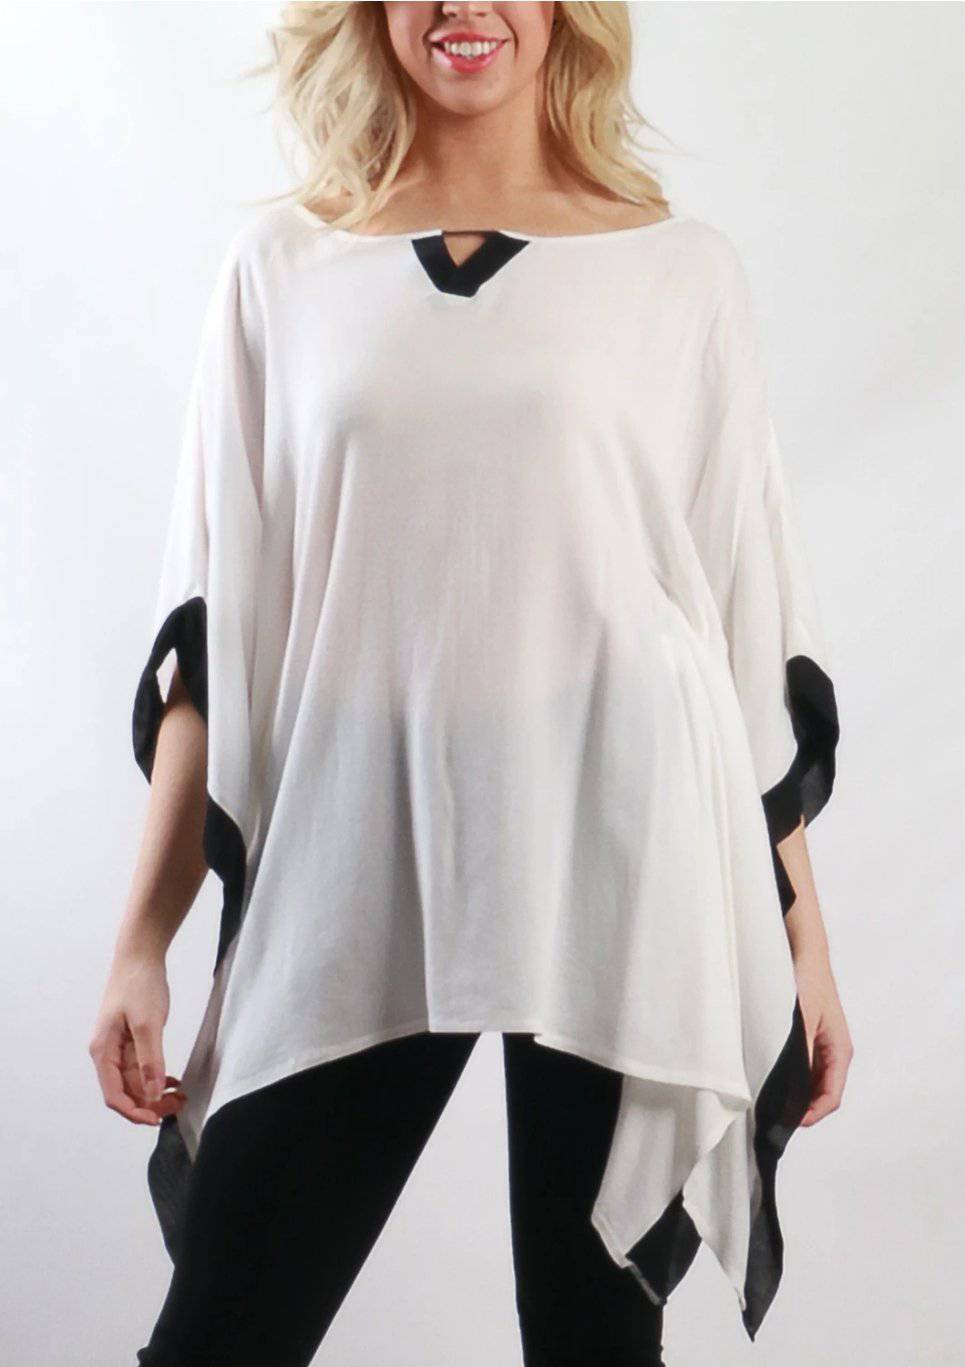 White Blouse Monochrome Over Sized Top Batwing Relaxed Fit - Tracey Glynn Fashions